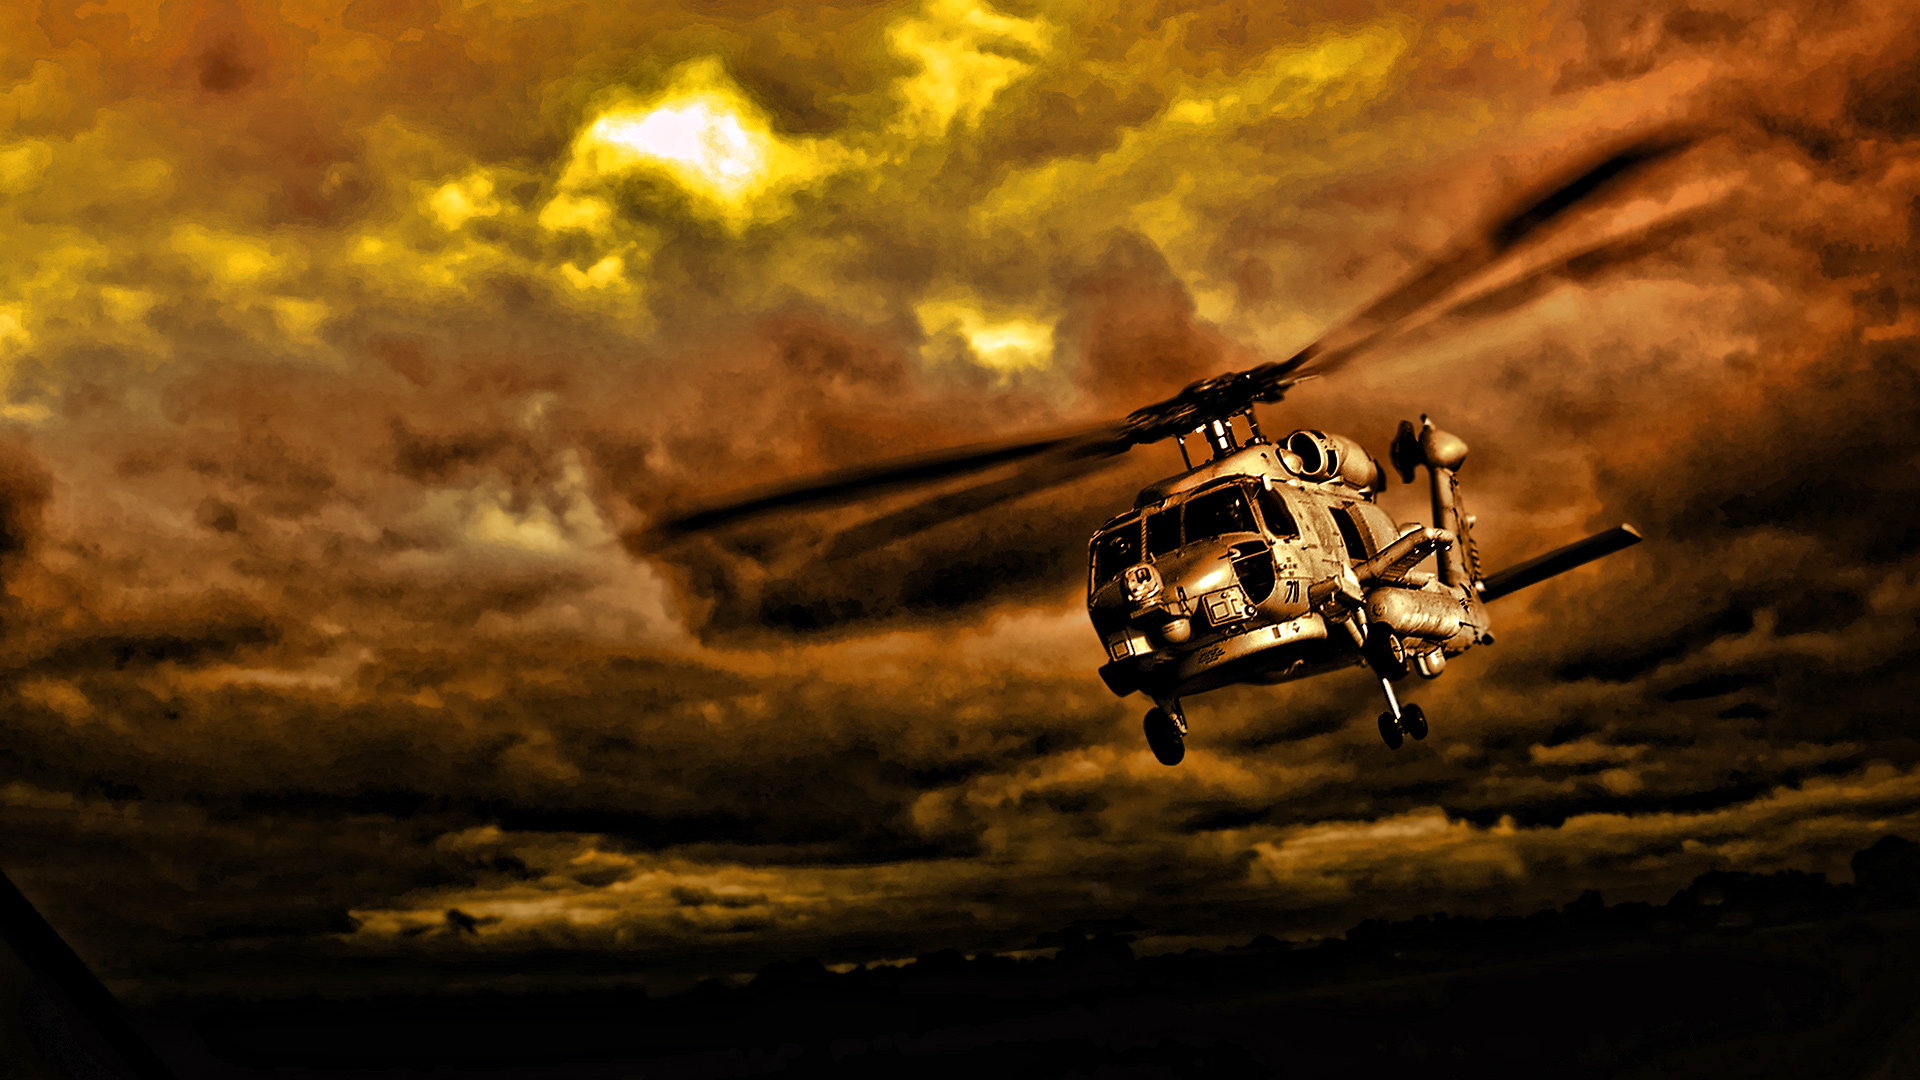 Helicopter HD Wallpaper | Background Image | 1920x1080 | ID:186115